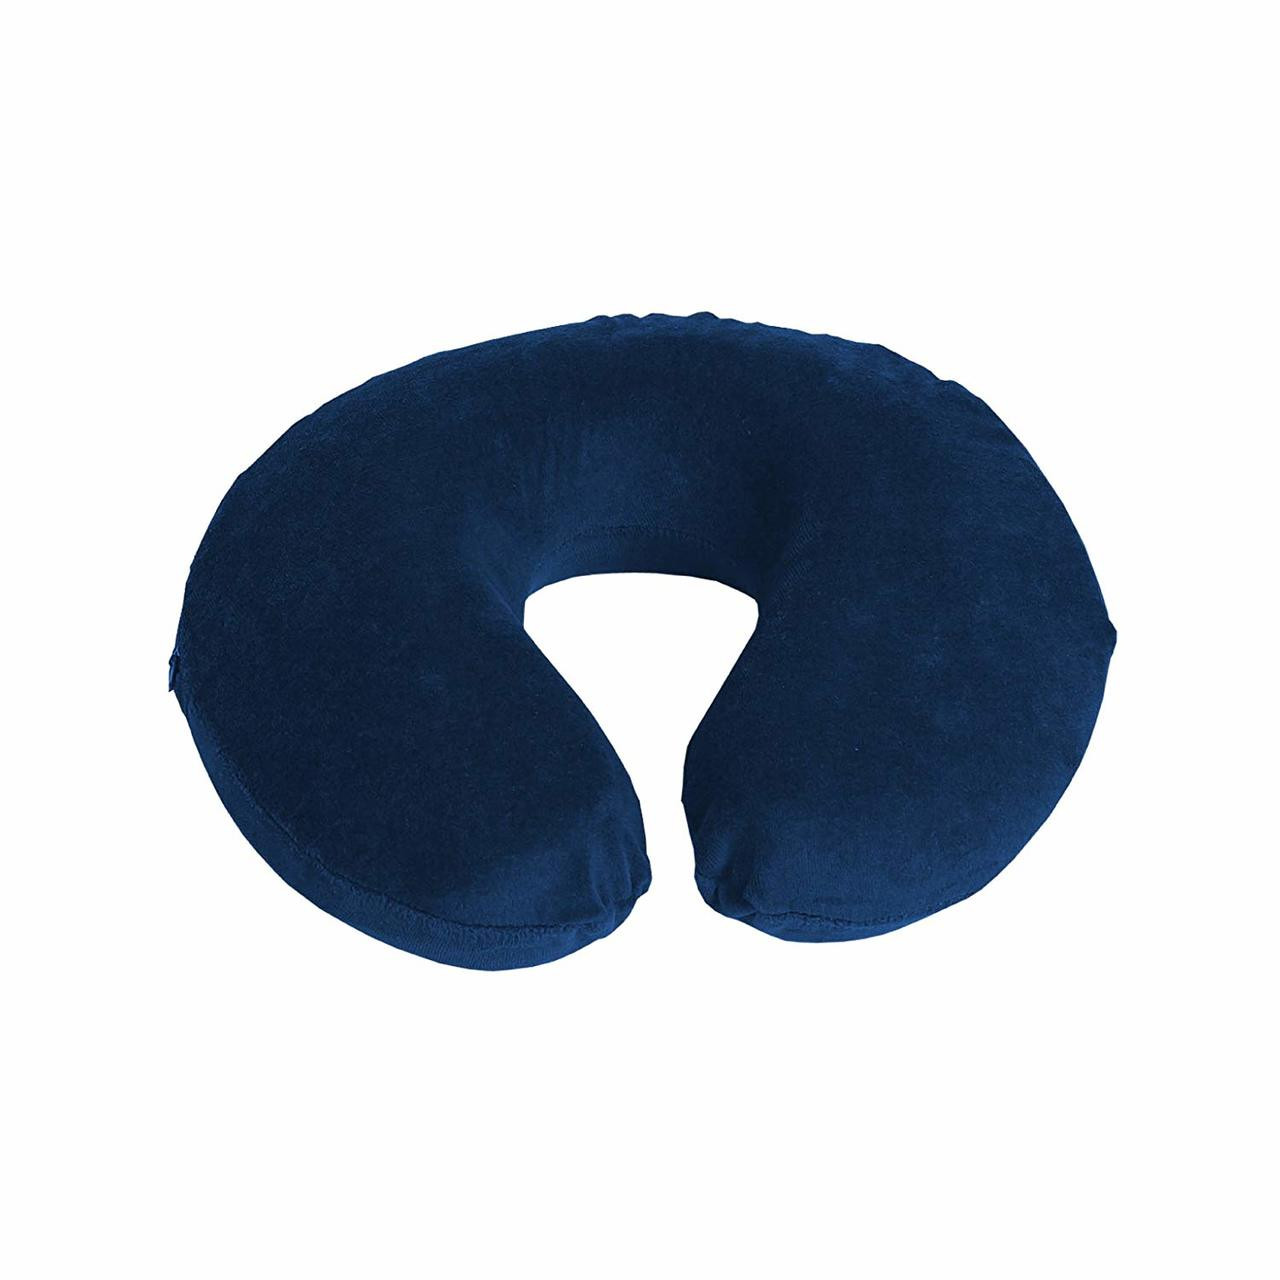 MEMORY FOAM Cover only for memory foam neck pillow (6151MFCO) (6151MFCO)